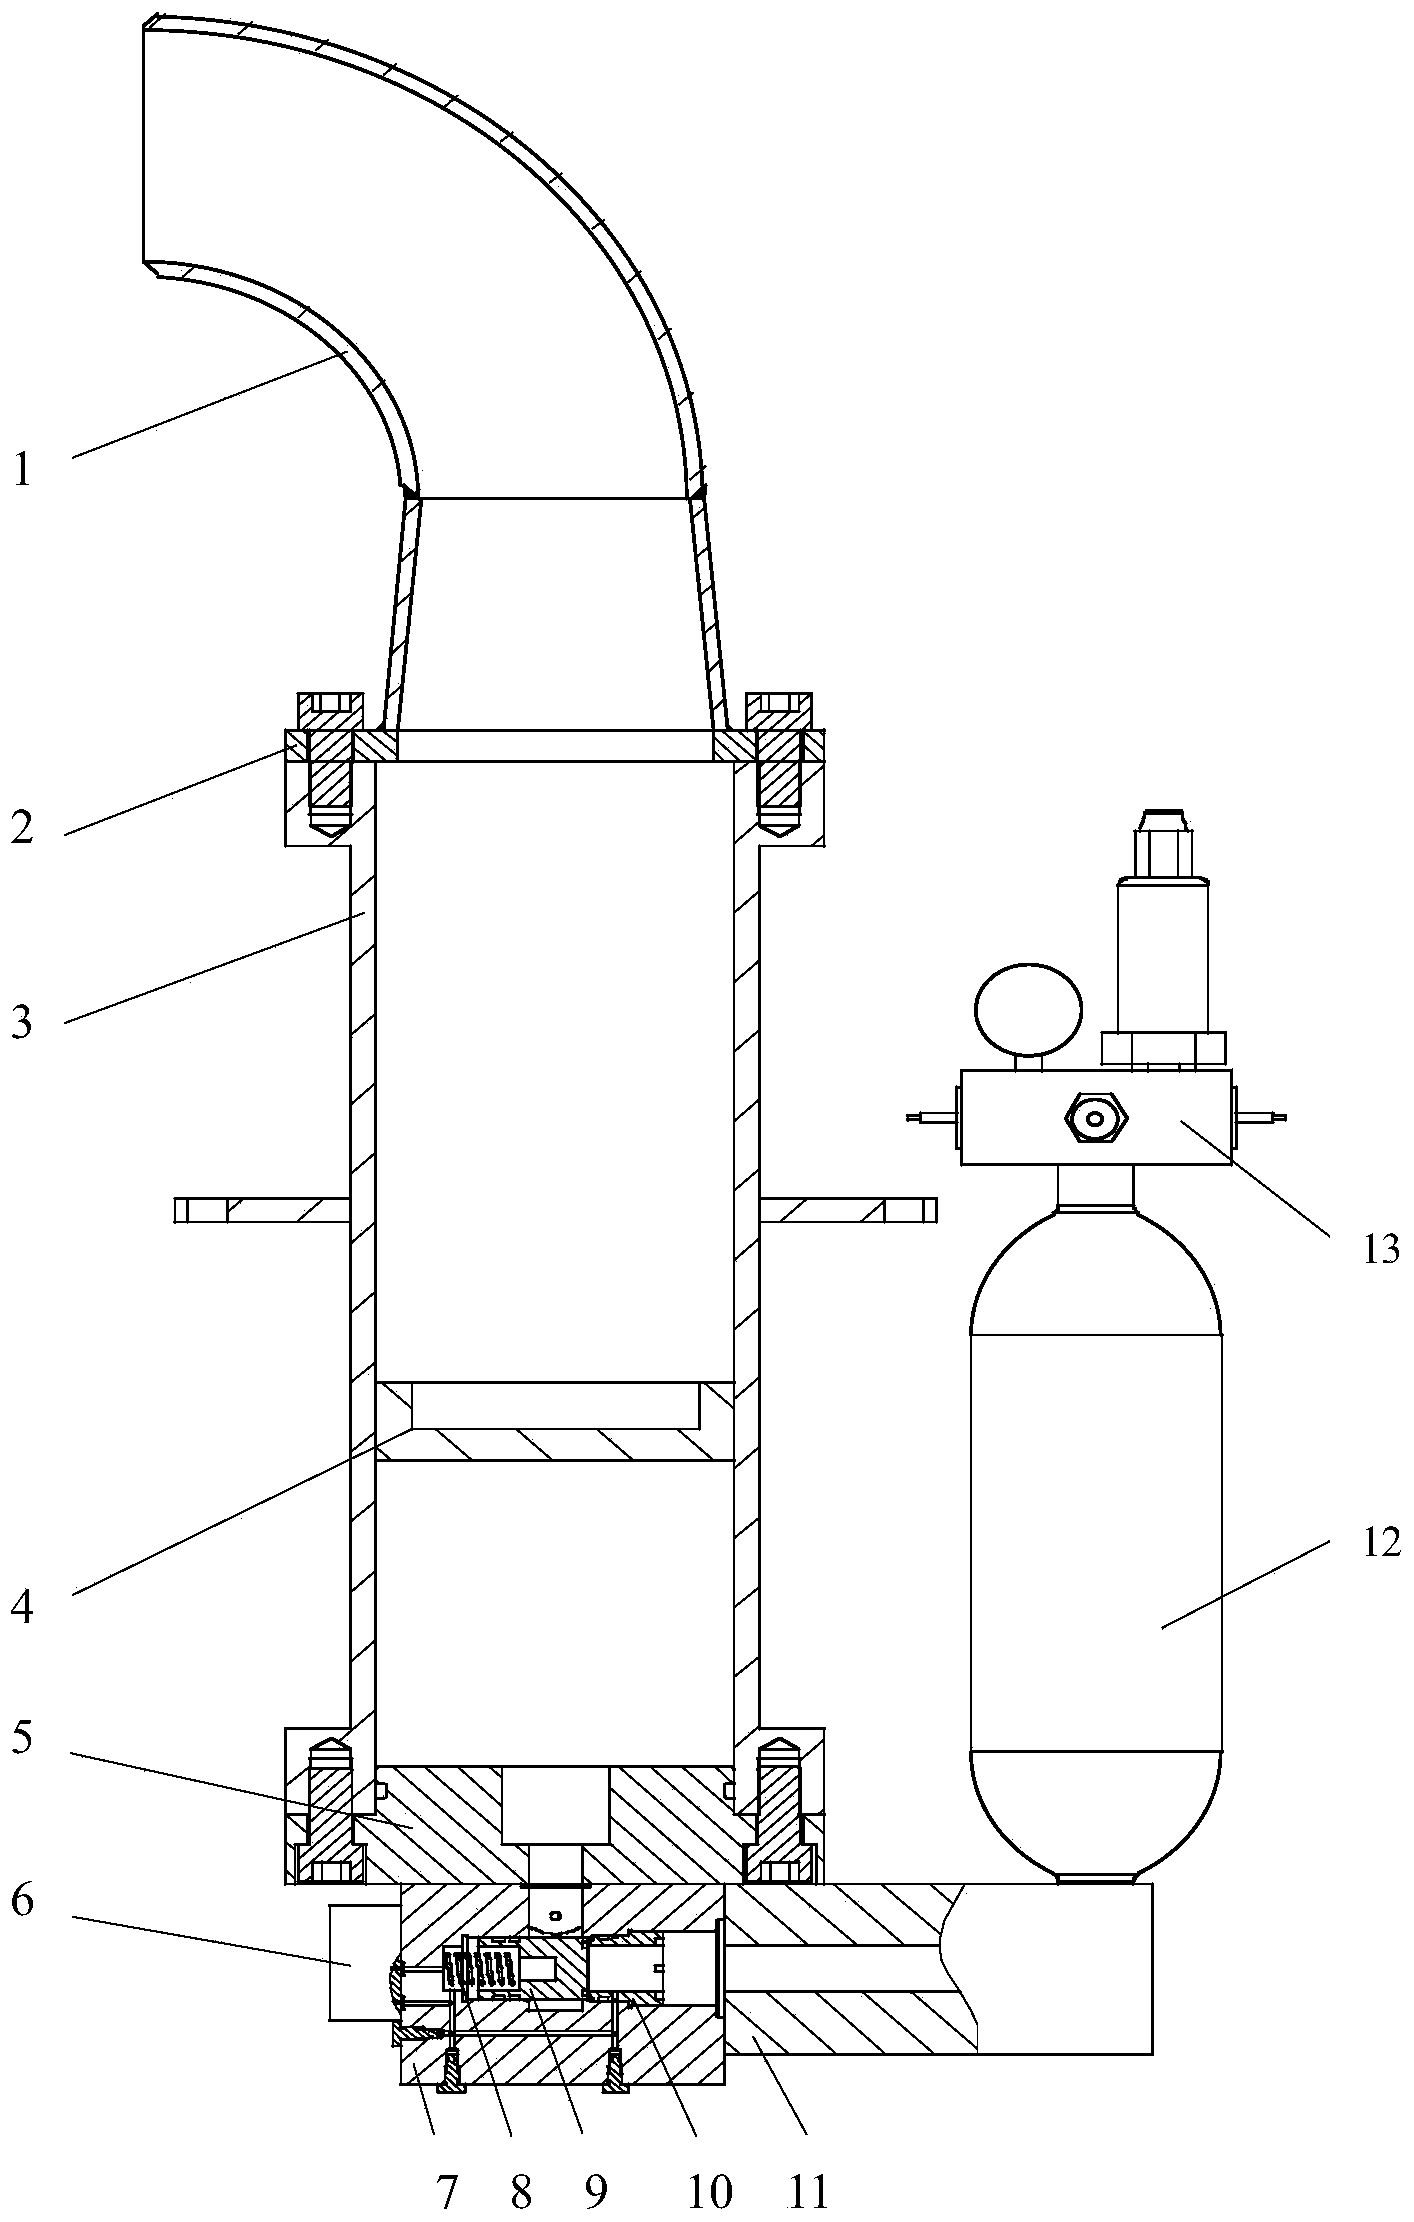 High-pressure gas pulse water monitor device